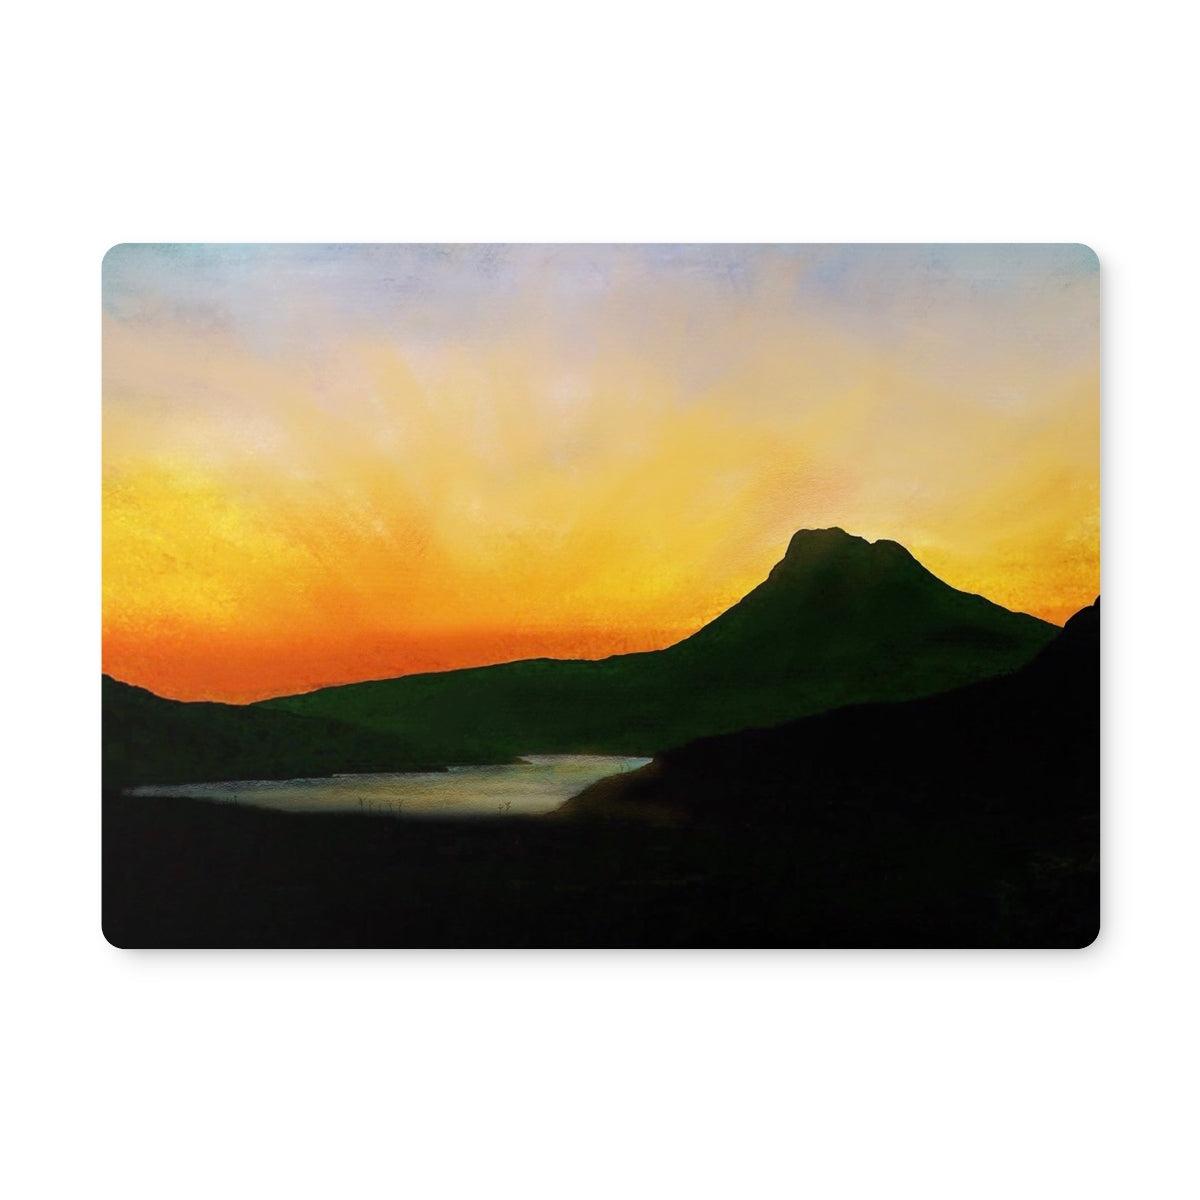 Stac Pollaidh Dusk Art Gifts Placemat-Placemats-Scottish Lochs & Mountains Art Gallery-Single Placemat-Paintings, Prints, Homeware, Art Gifts From Scotland By Scottish Artist Kevin Hunter